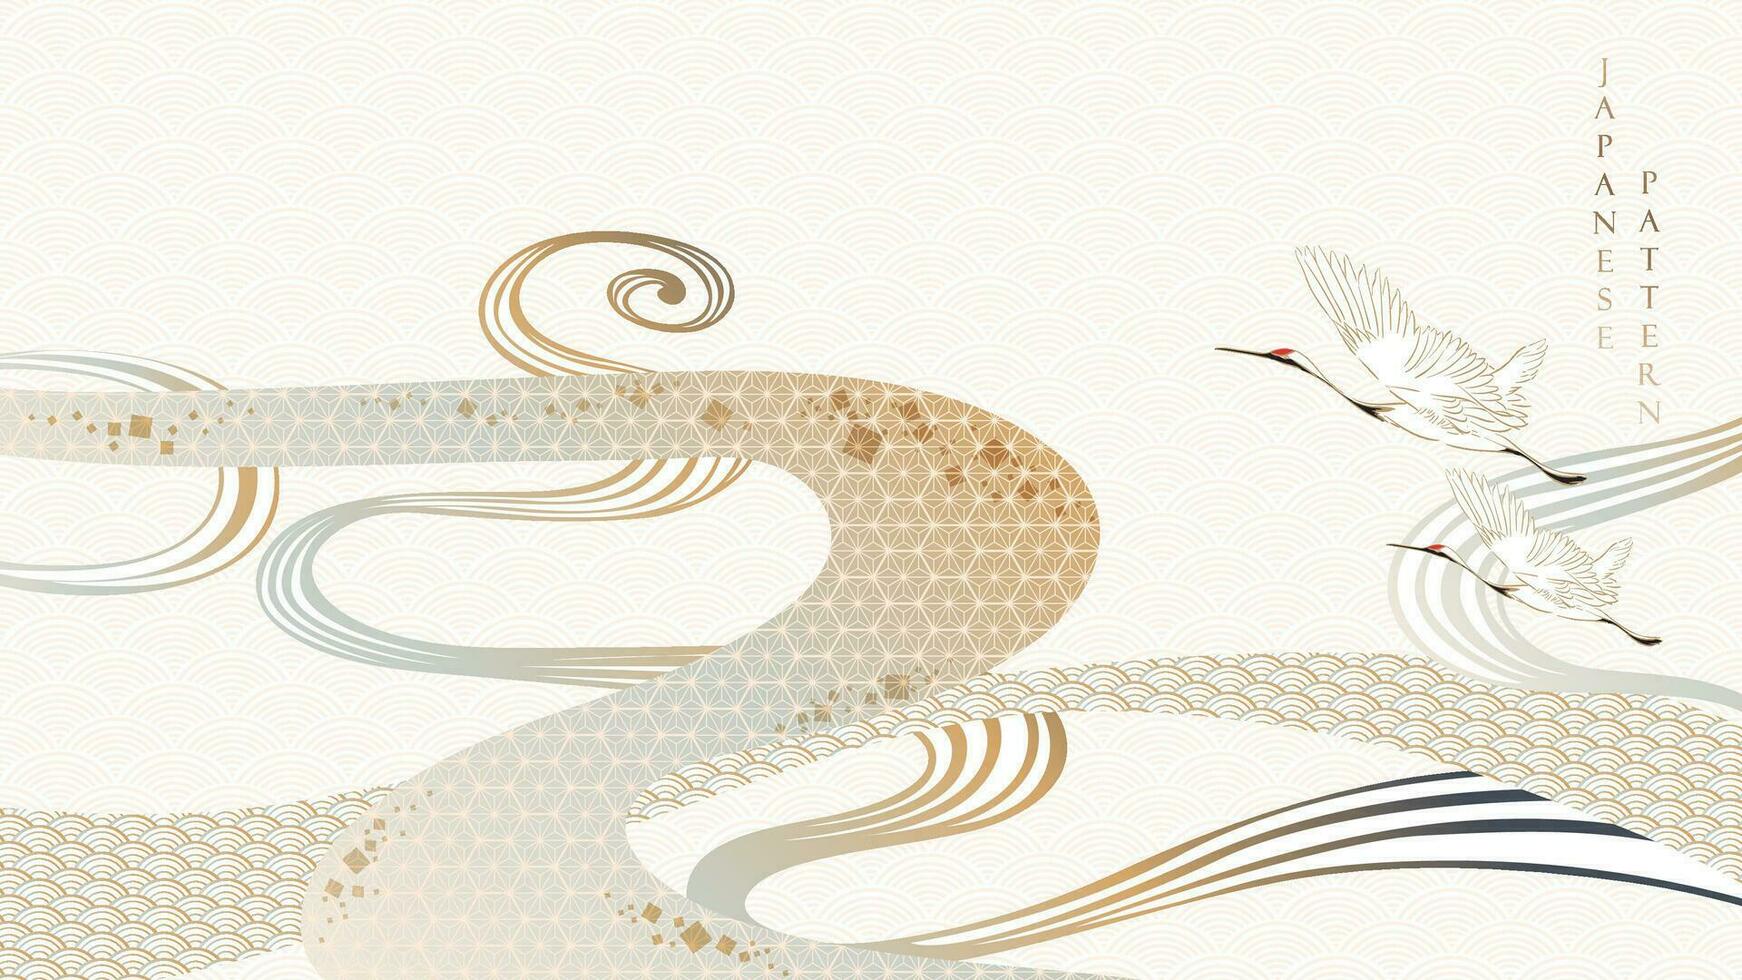 Abstract landscape with Japanese wave pattern vector. Nature art background with crane birds invitation card template in vintage style. Asian traditional icon and hand drawn line  in oriental style. vector